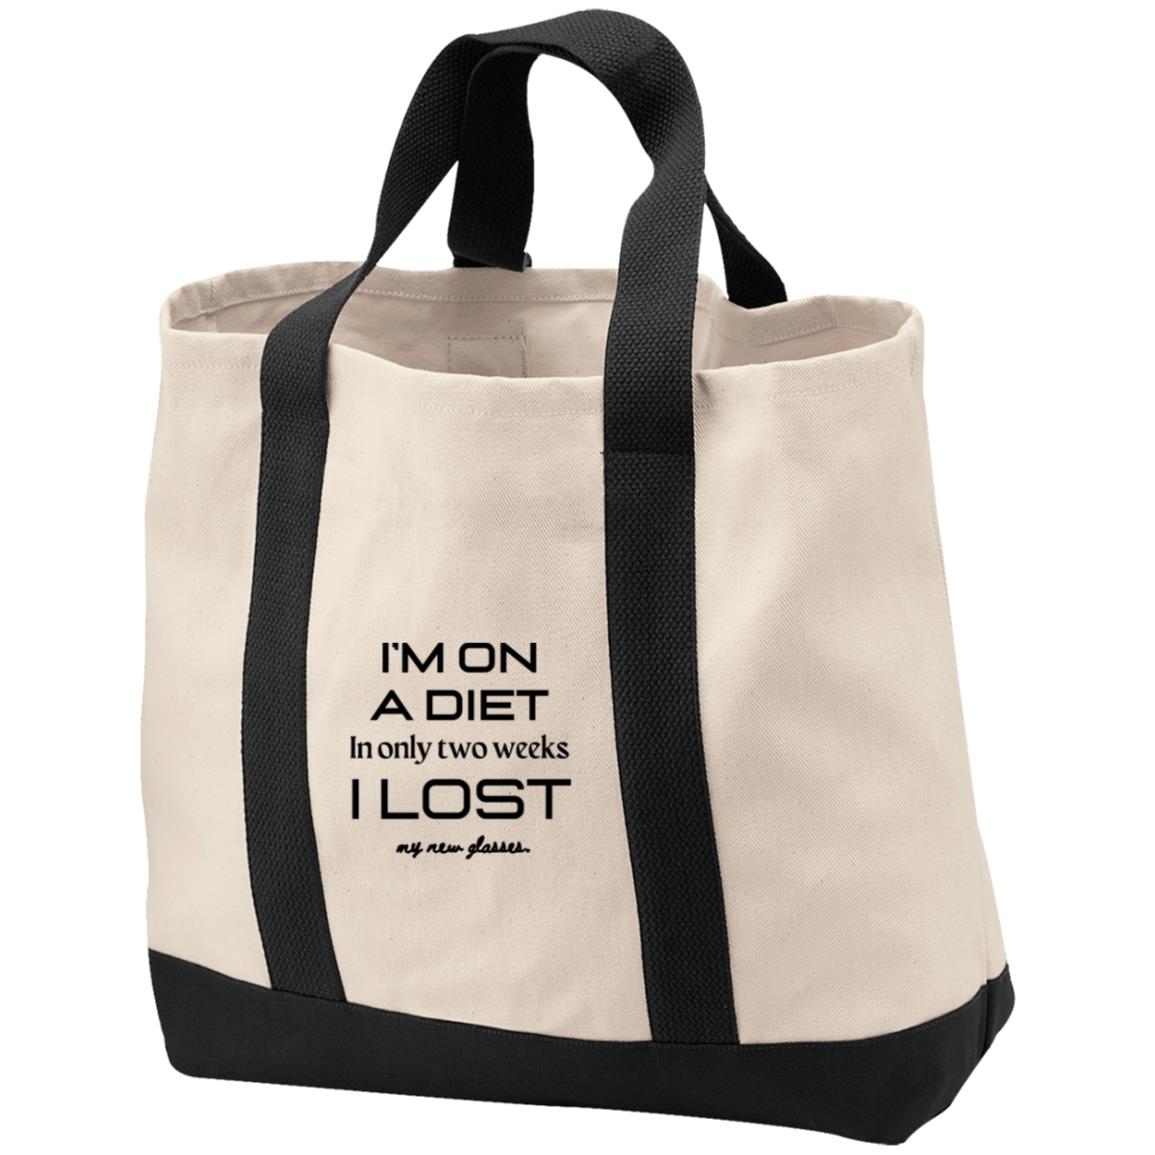 DIET DILEMMA 2-Tone Shopping Tote